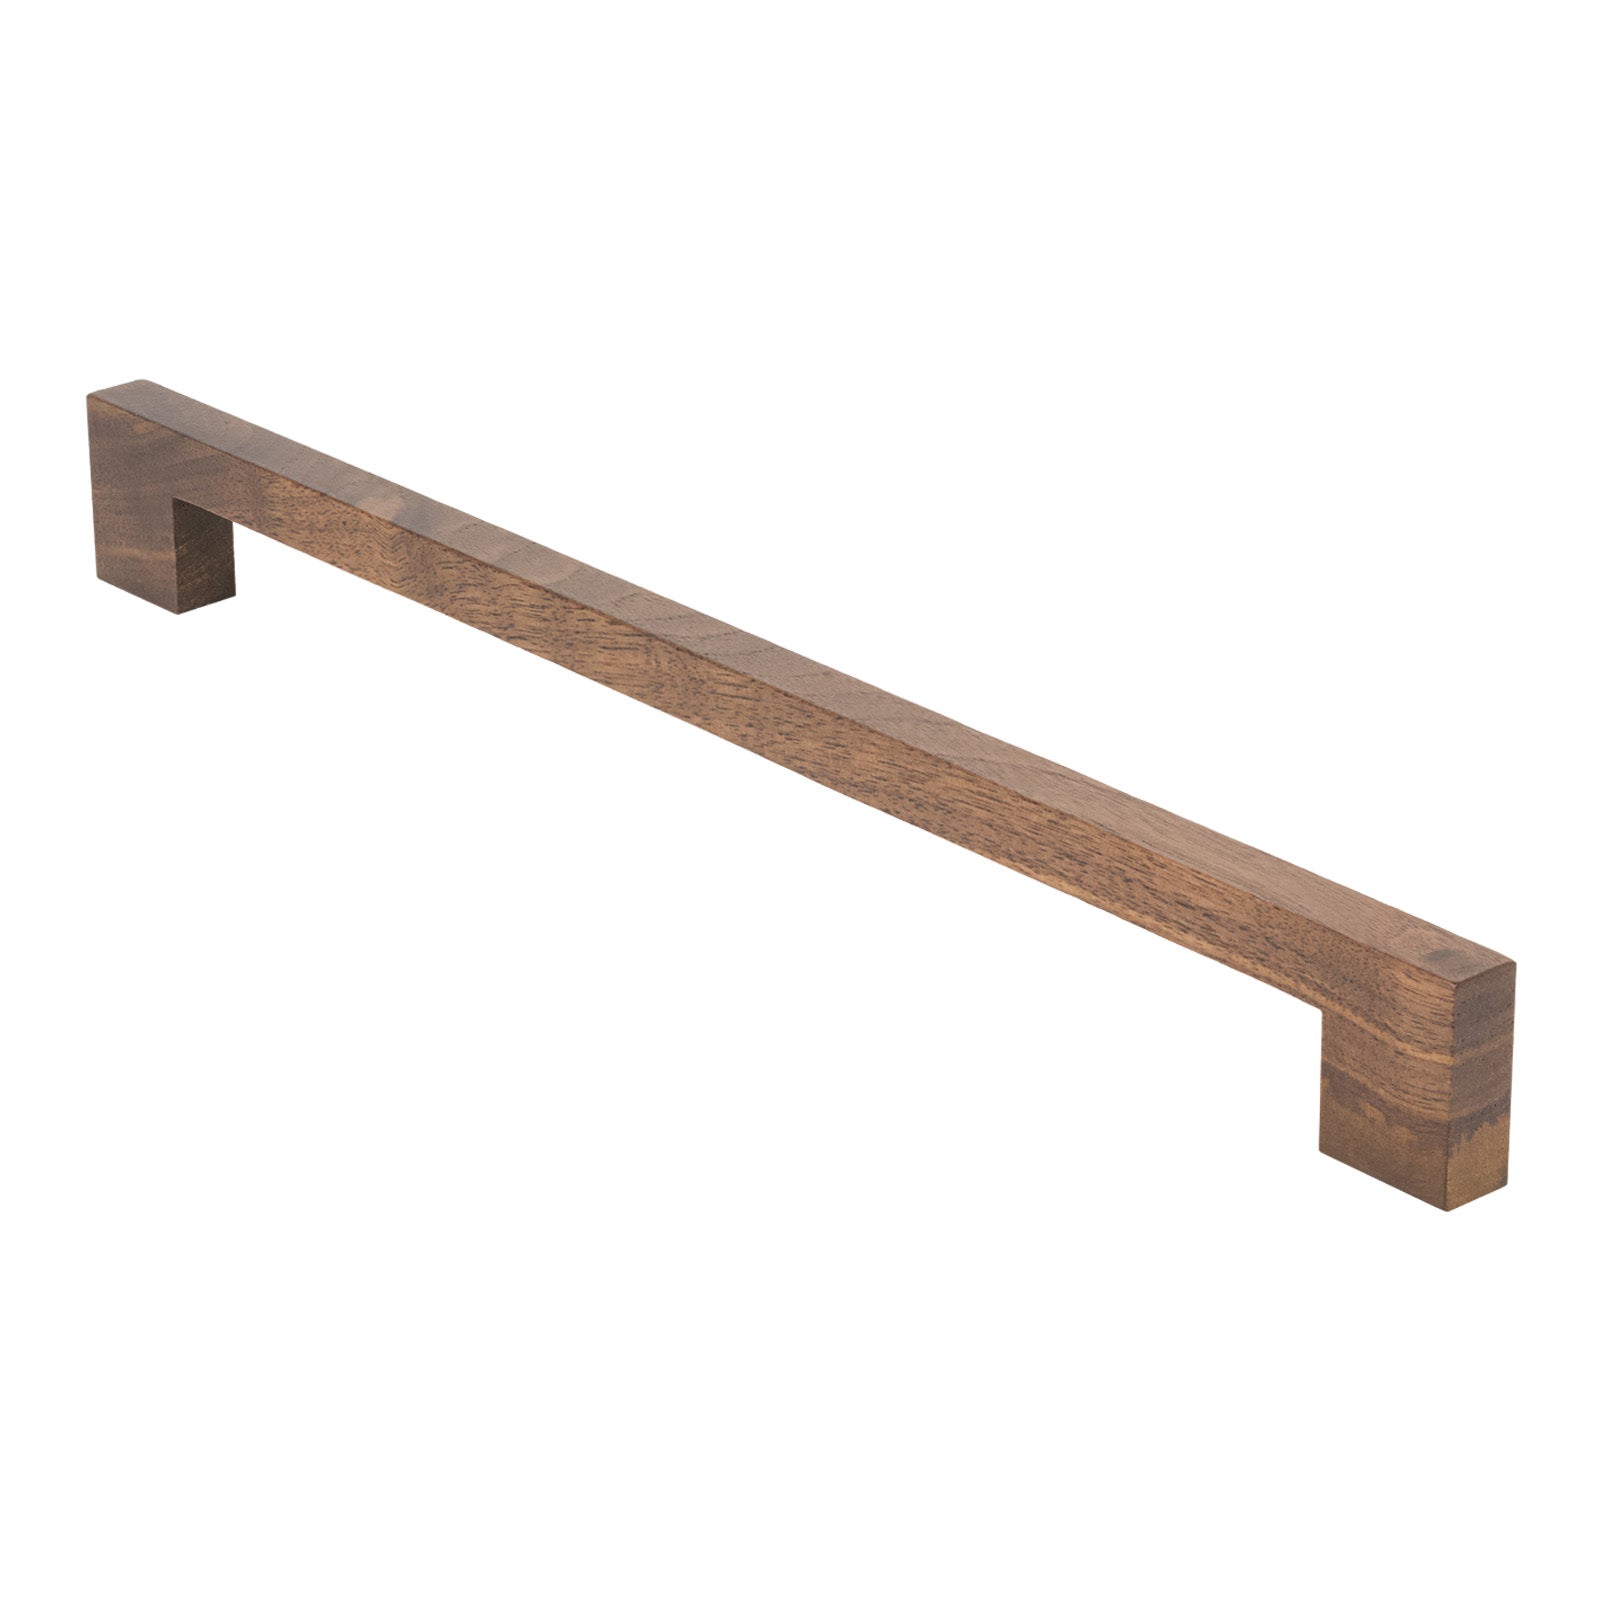 SHOW 288mm Metro Cabinet Pull Handle In Walnut Finish